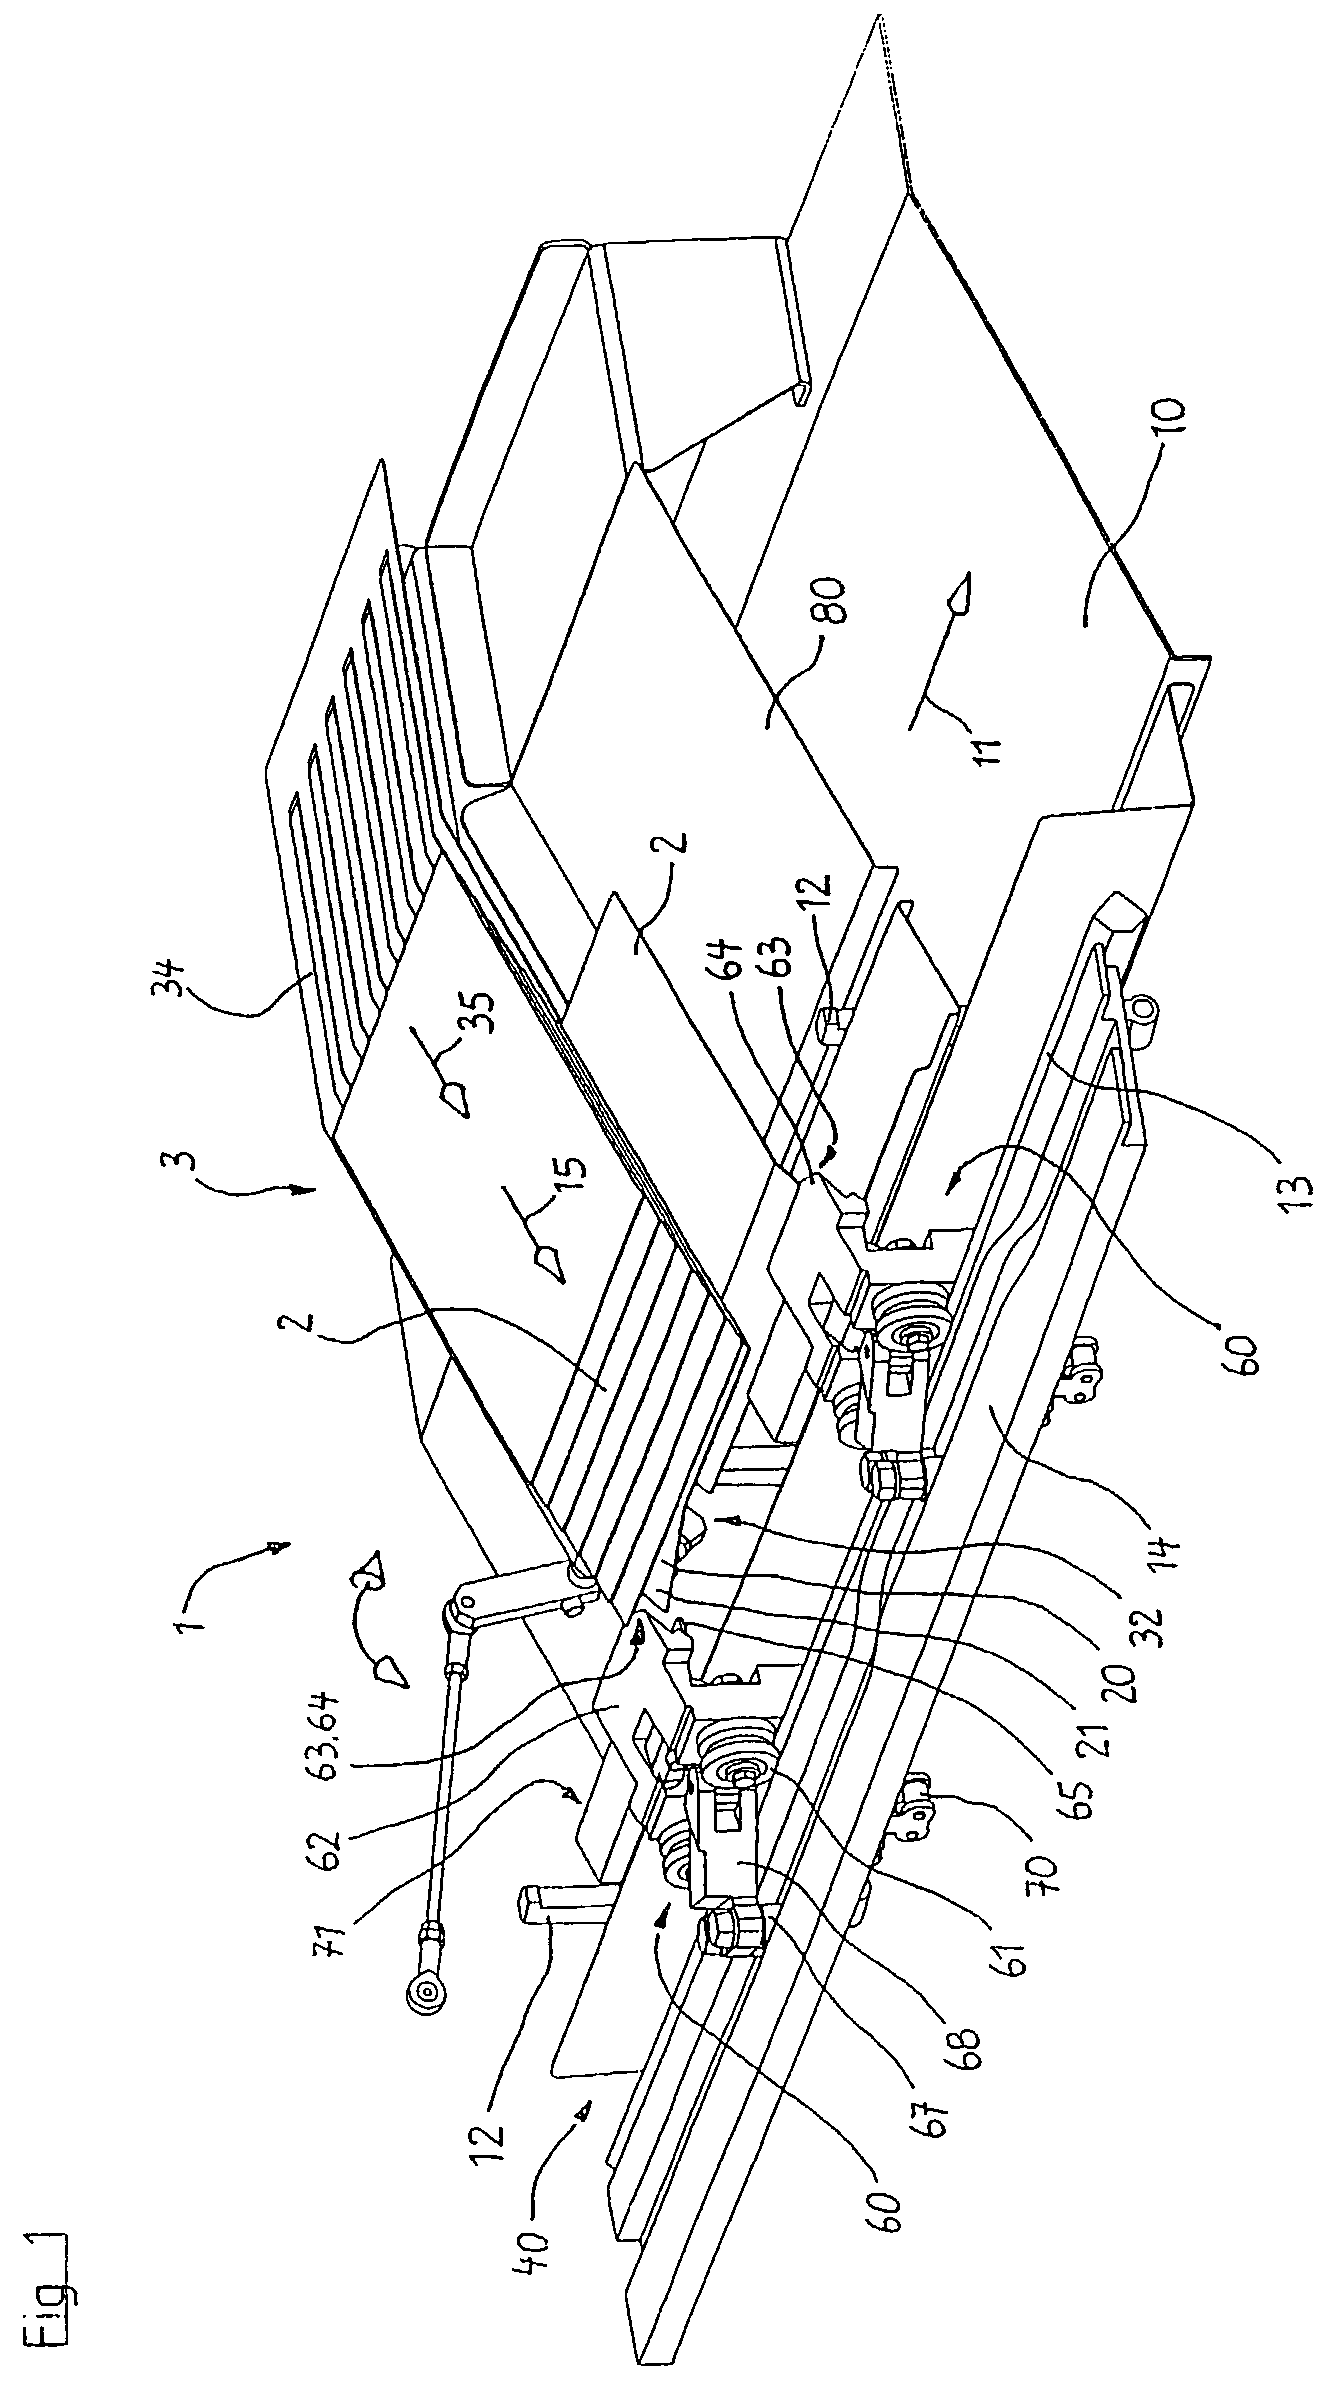 Method and apparatus for feeding flat printed products